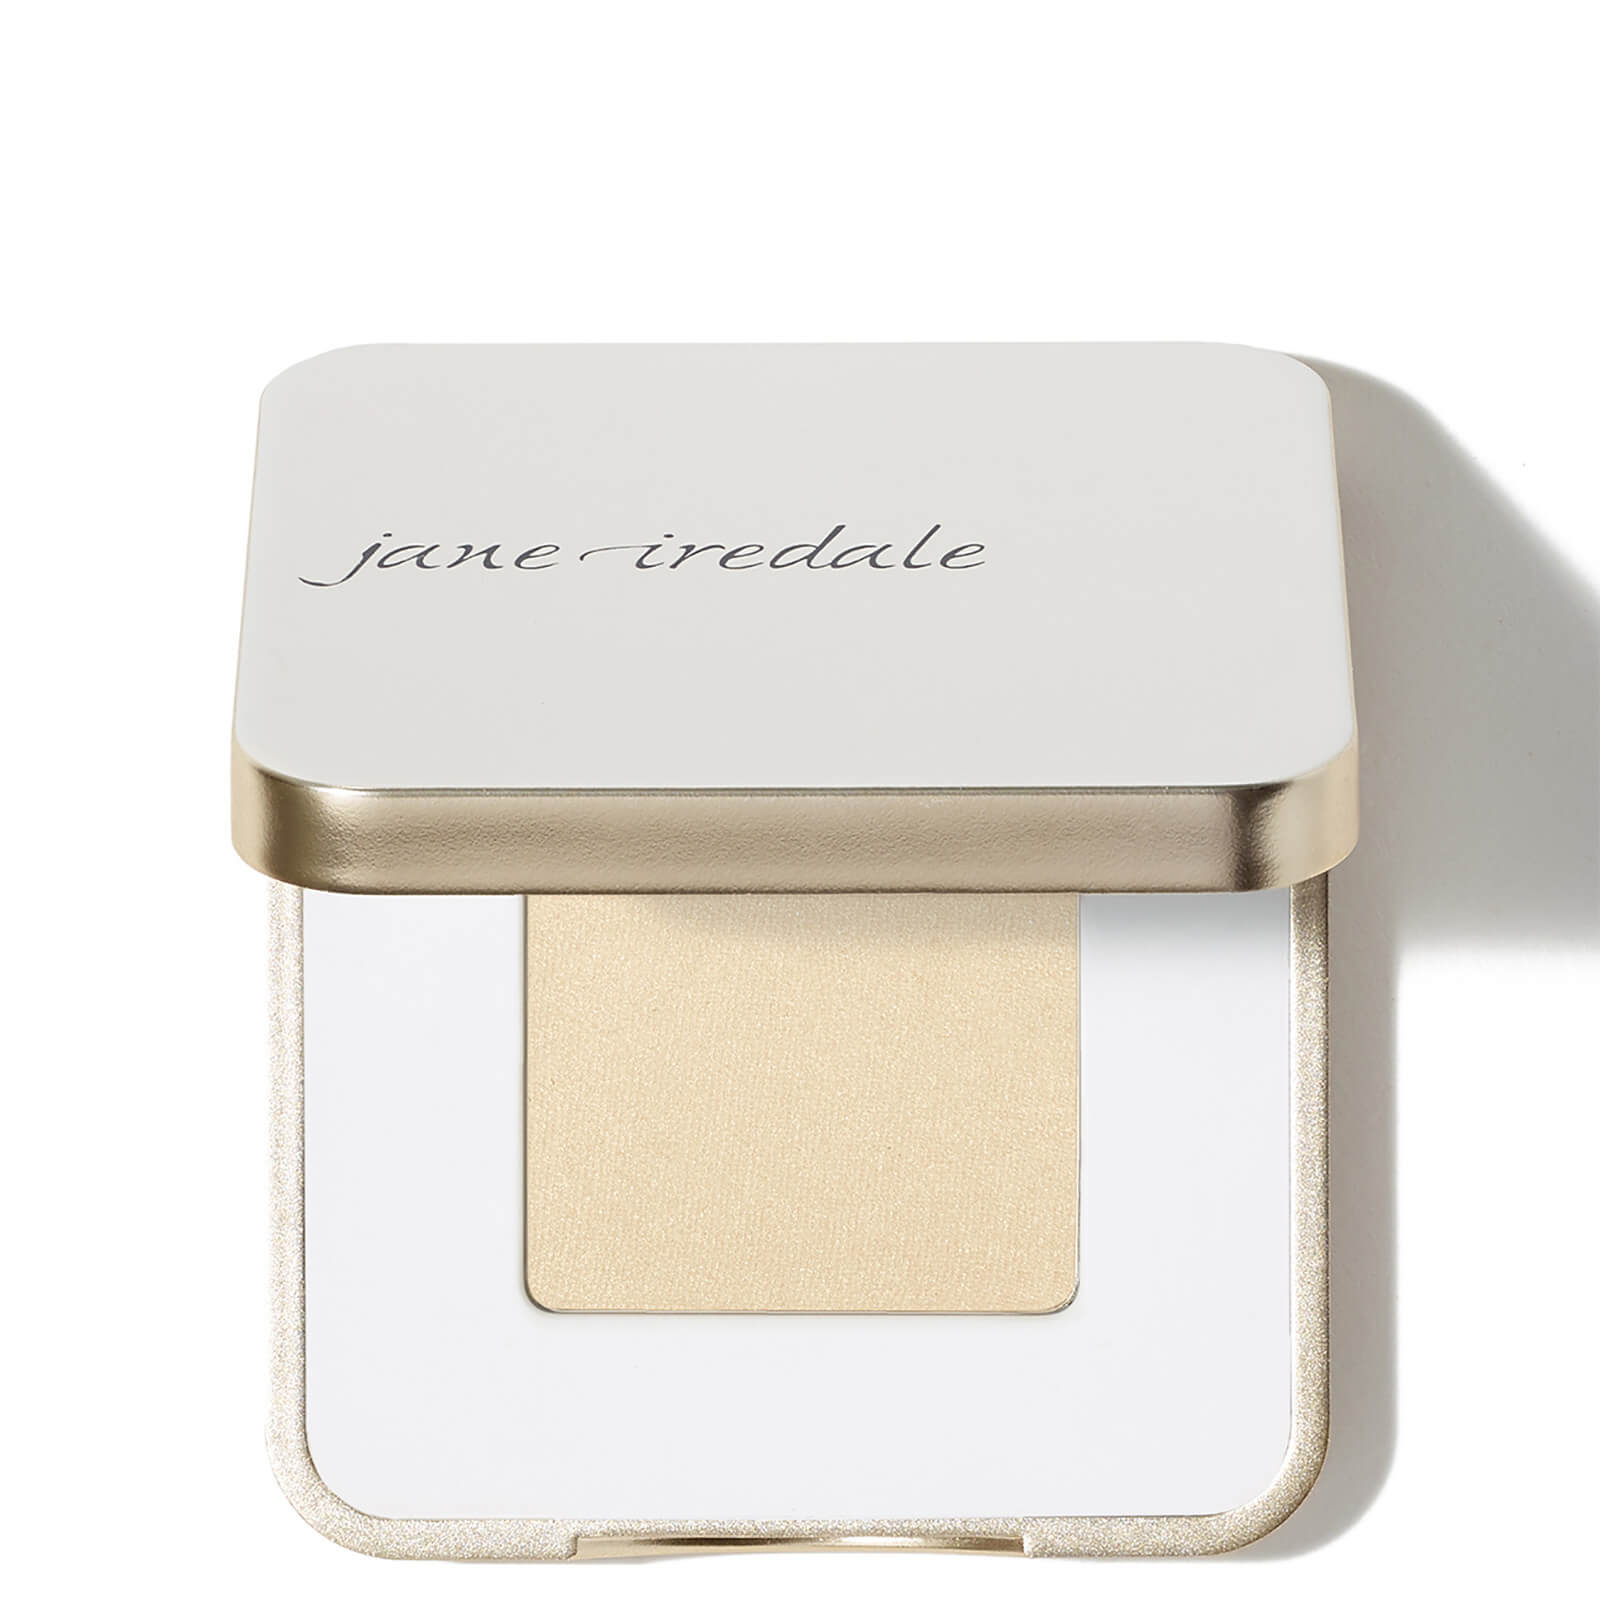 Jane Iredale Purepressed Eye Shadow 3g (various Shades) In Oyster